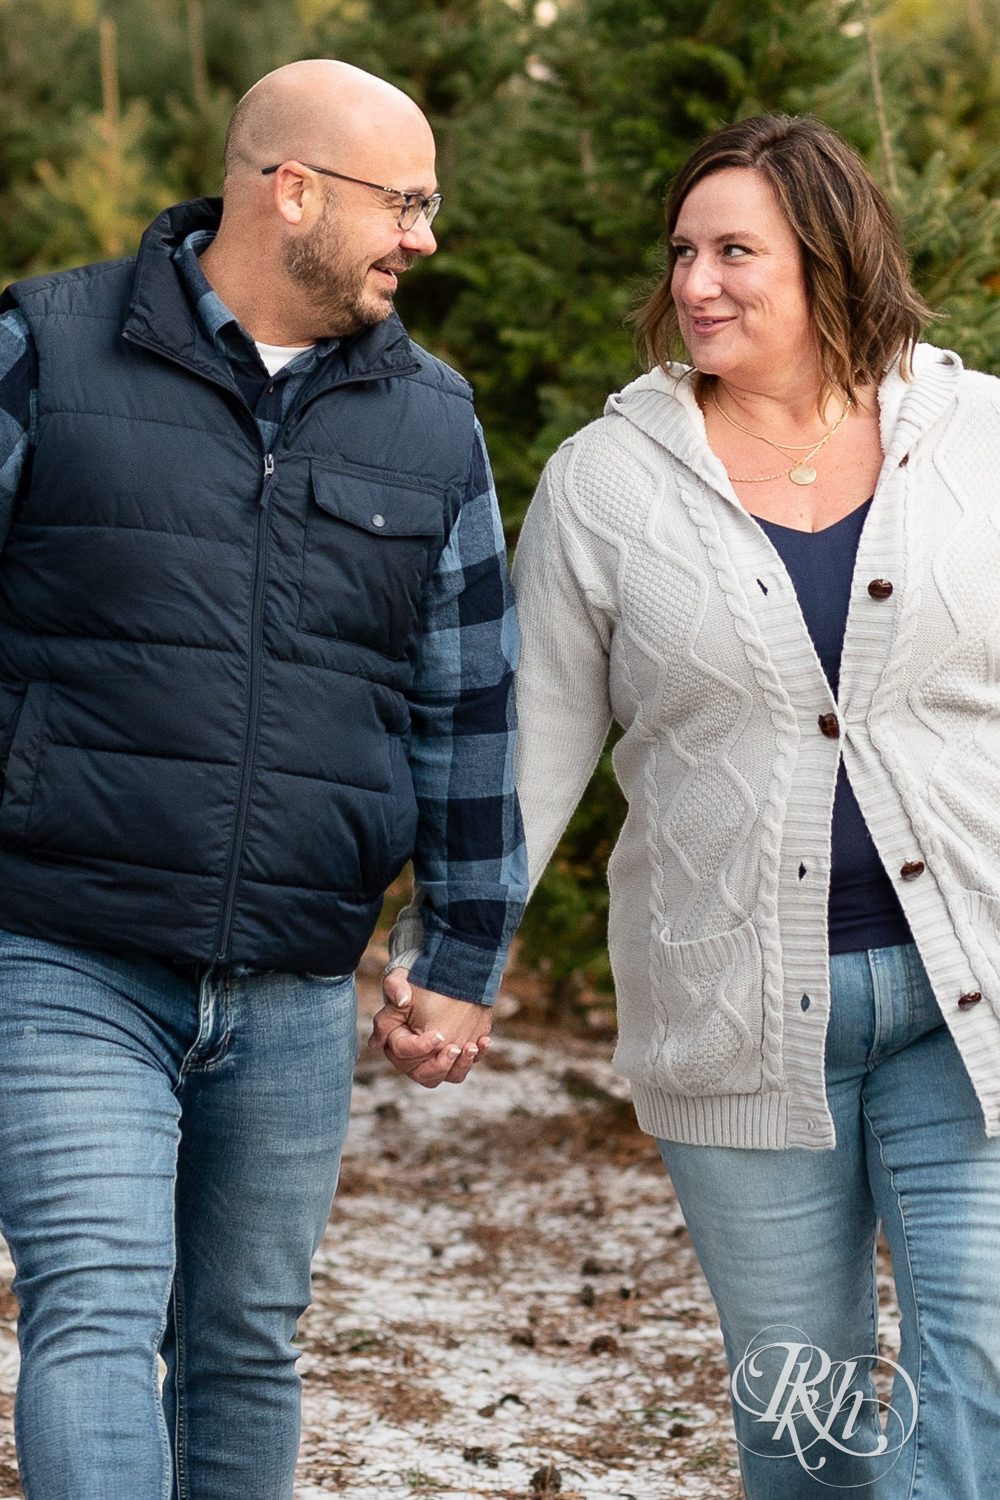 Black man and white woman walk holding hands and laughing at Hansen Tree Farm in Anoka, Minnesota.